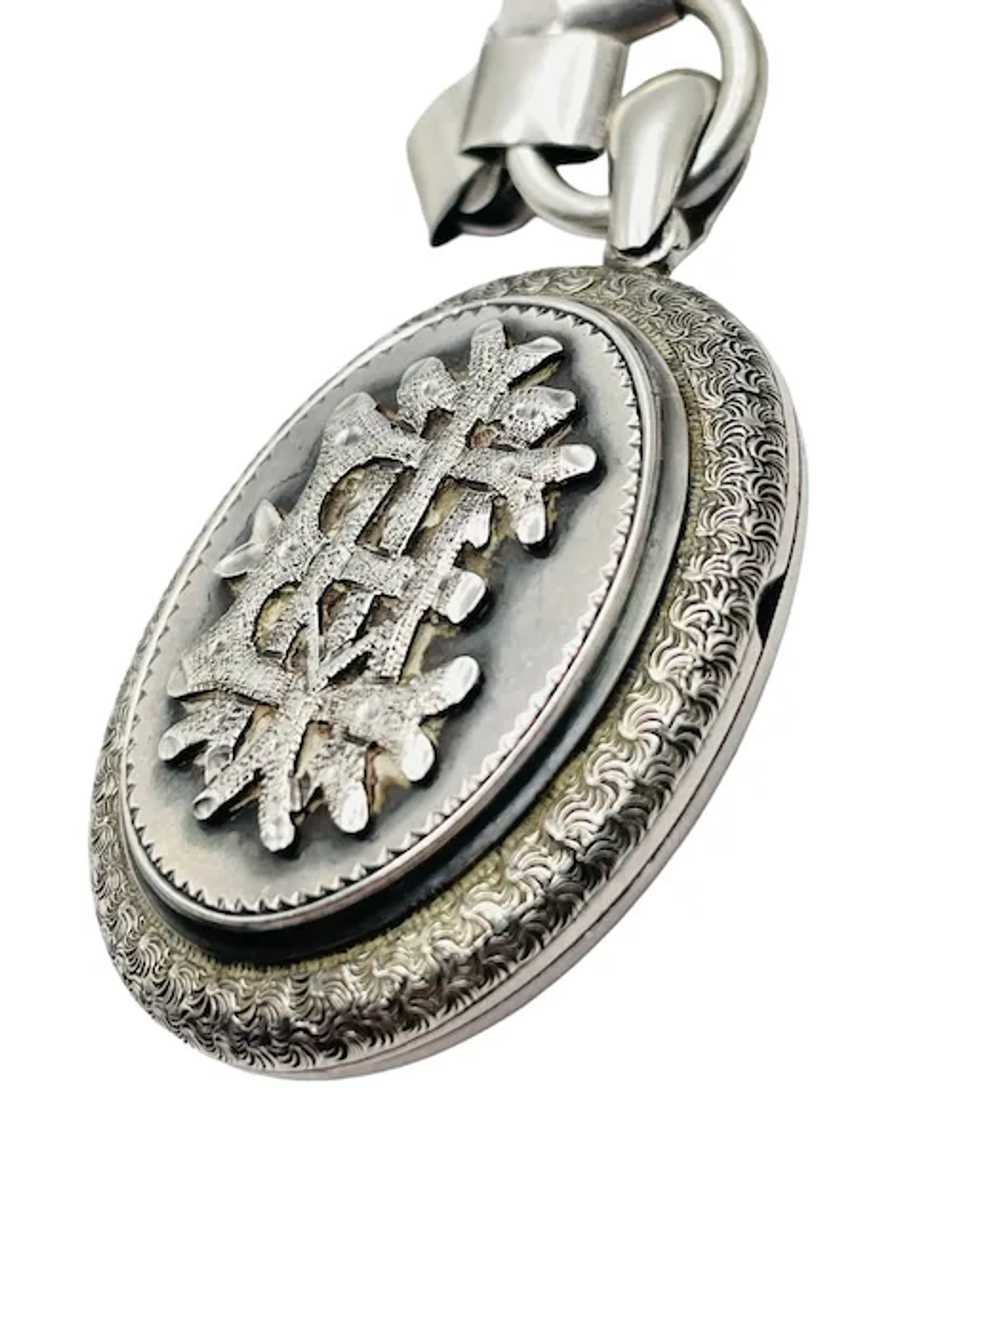 Antique Sterling Silver Locket Book Chain Necklace - image 5